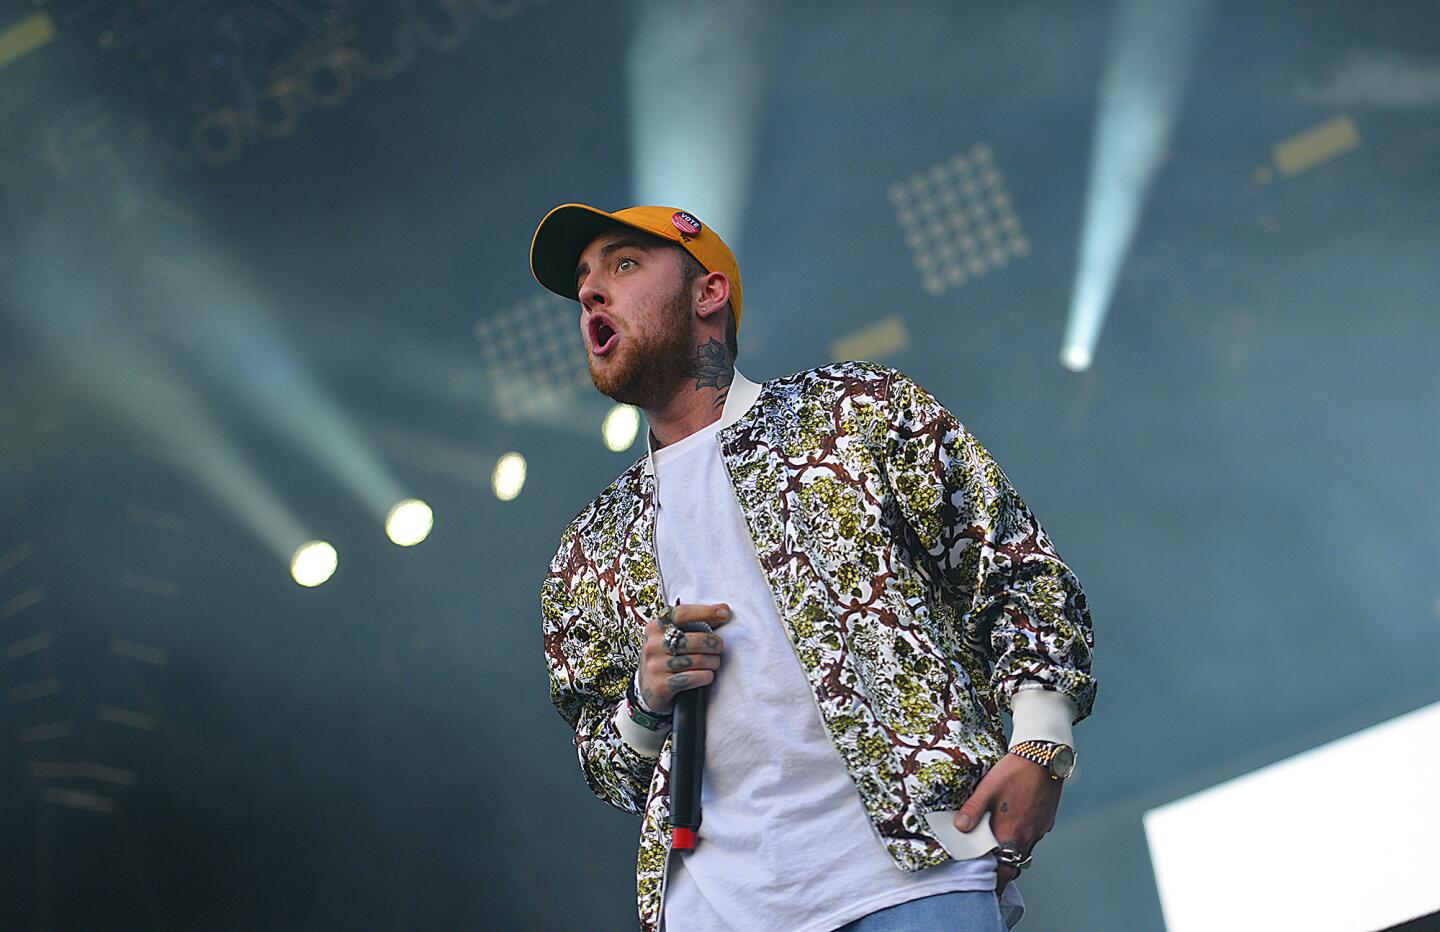 Mac Miller performs at the Okeechobee Music and Arts Festival on March 5, 2016, in Okeechobee, Fla.